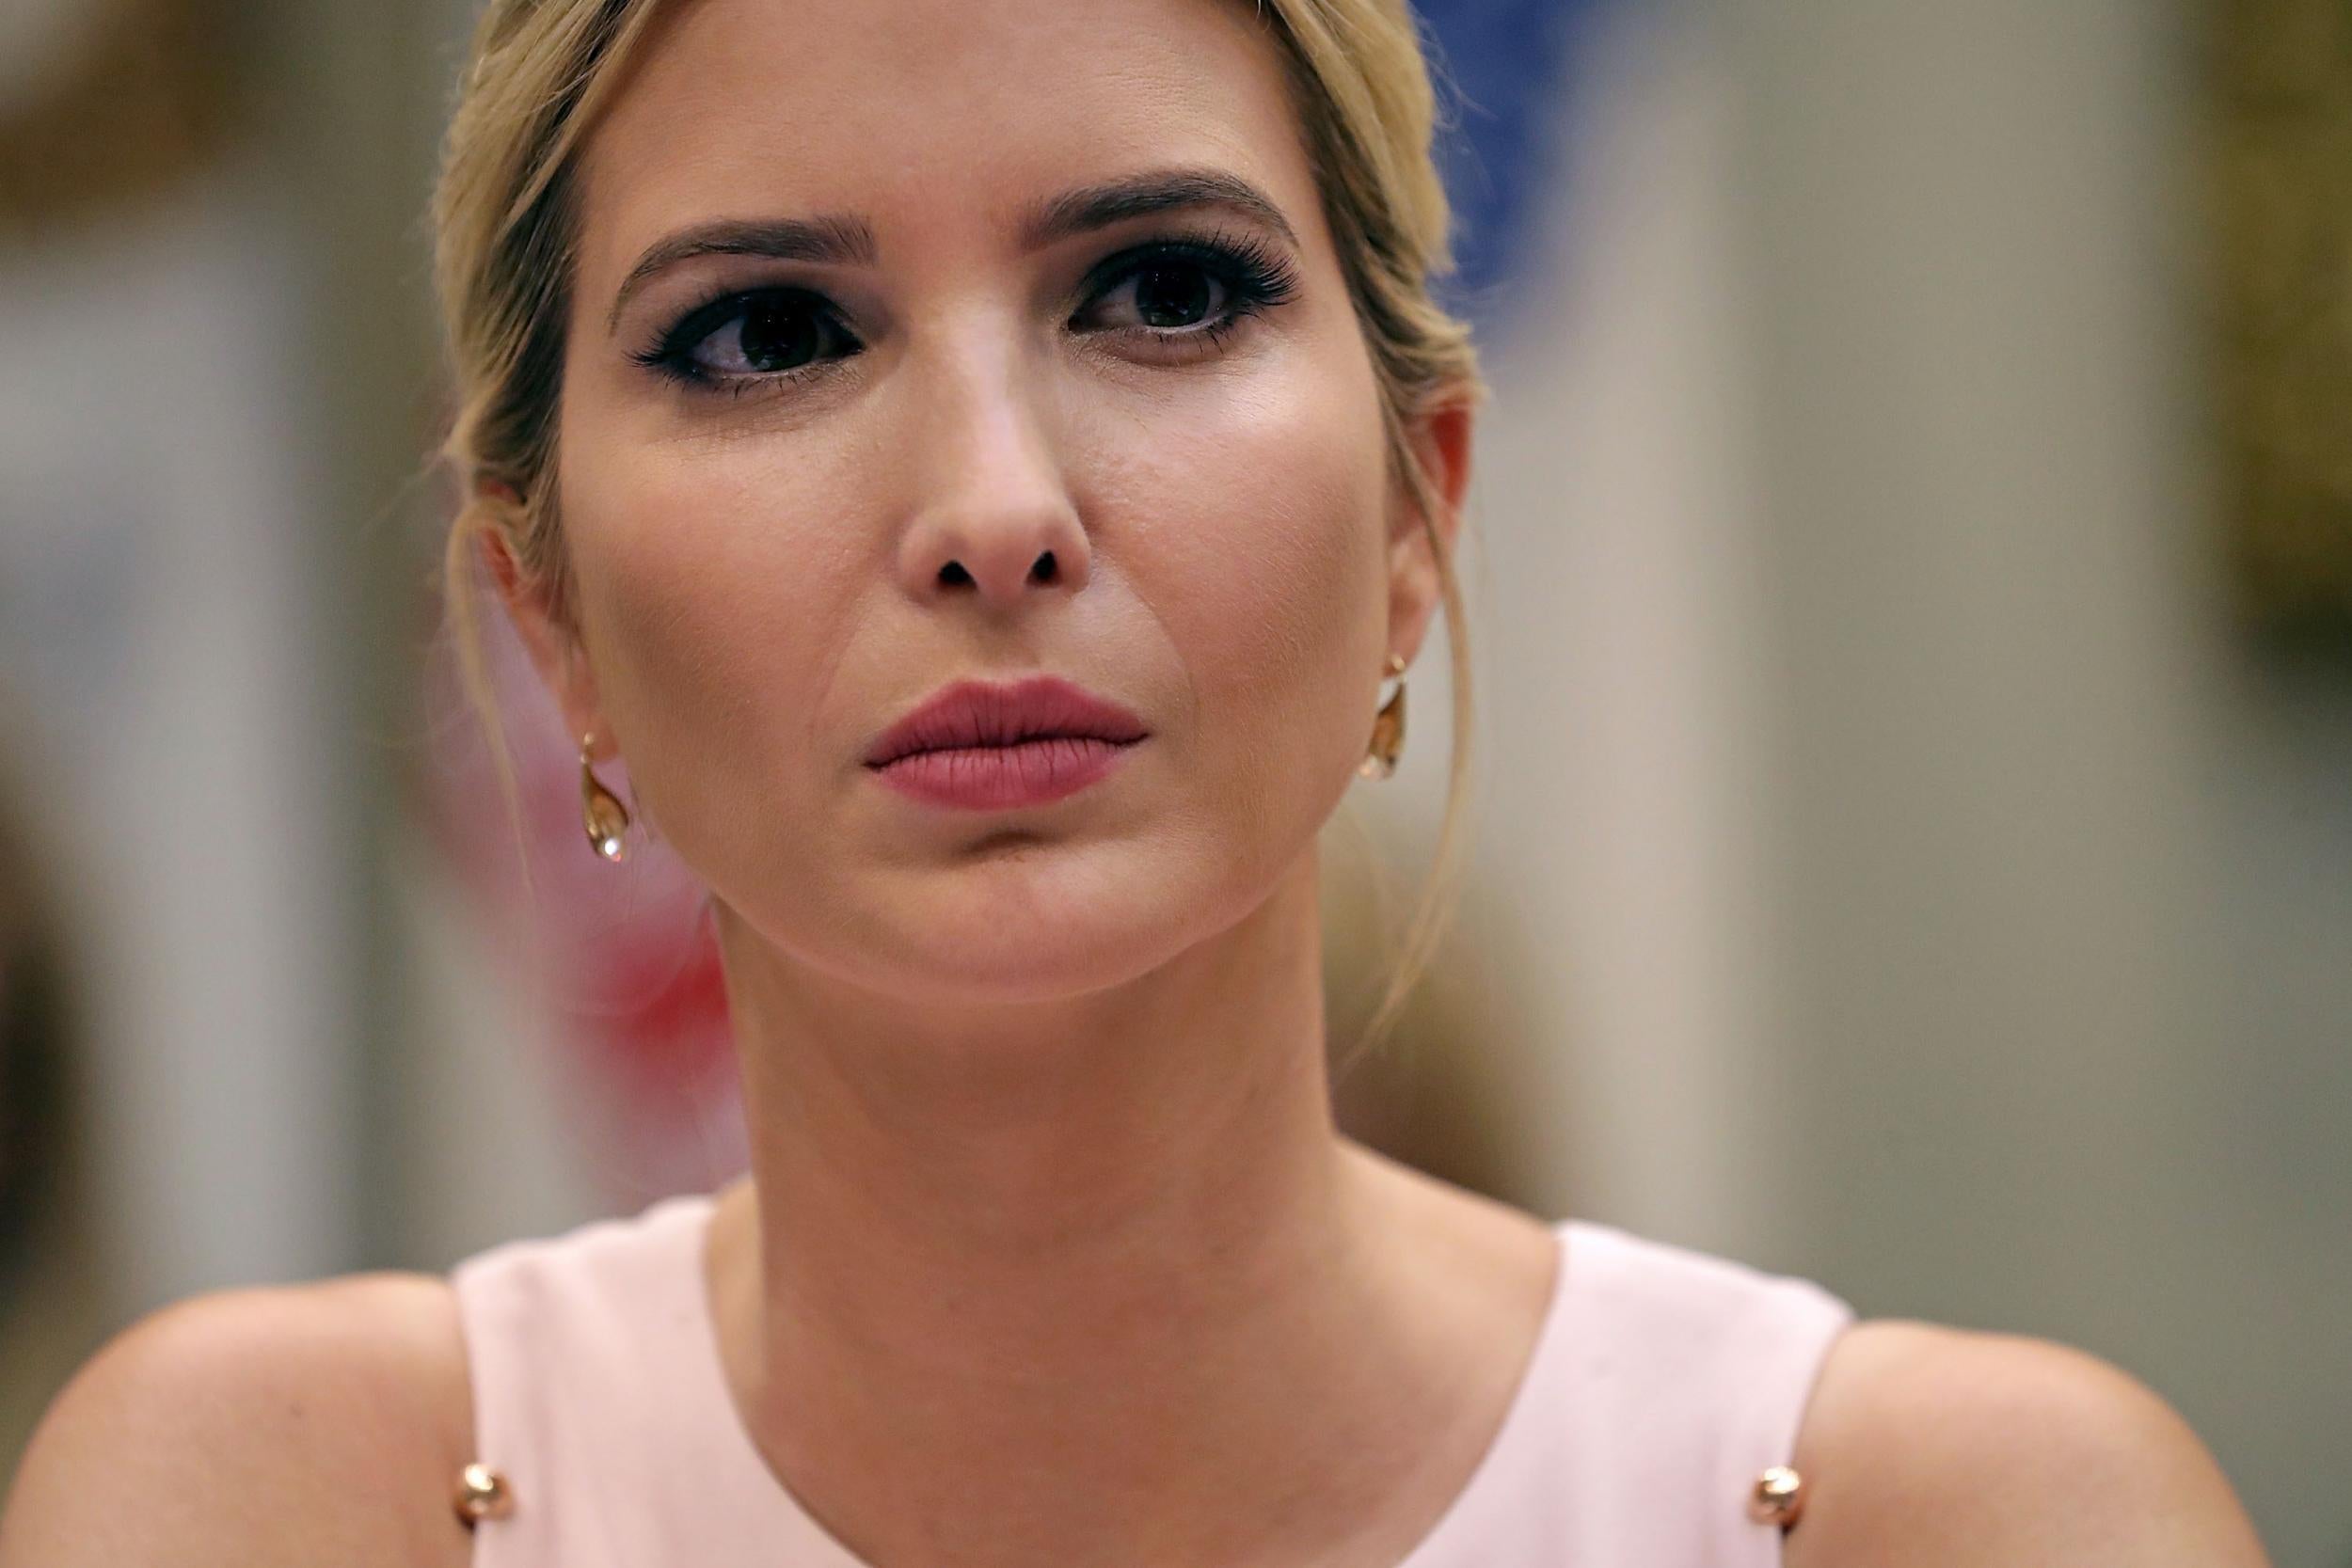 Ivanka Trump says she didn't have knowledge about alleged copycat sandals made under he fashion label